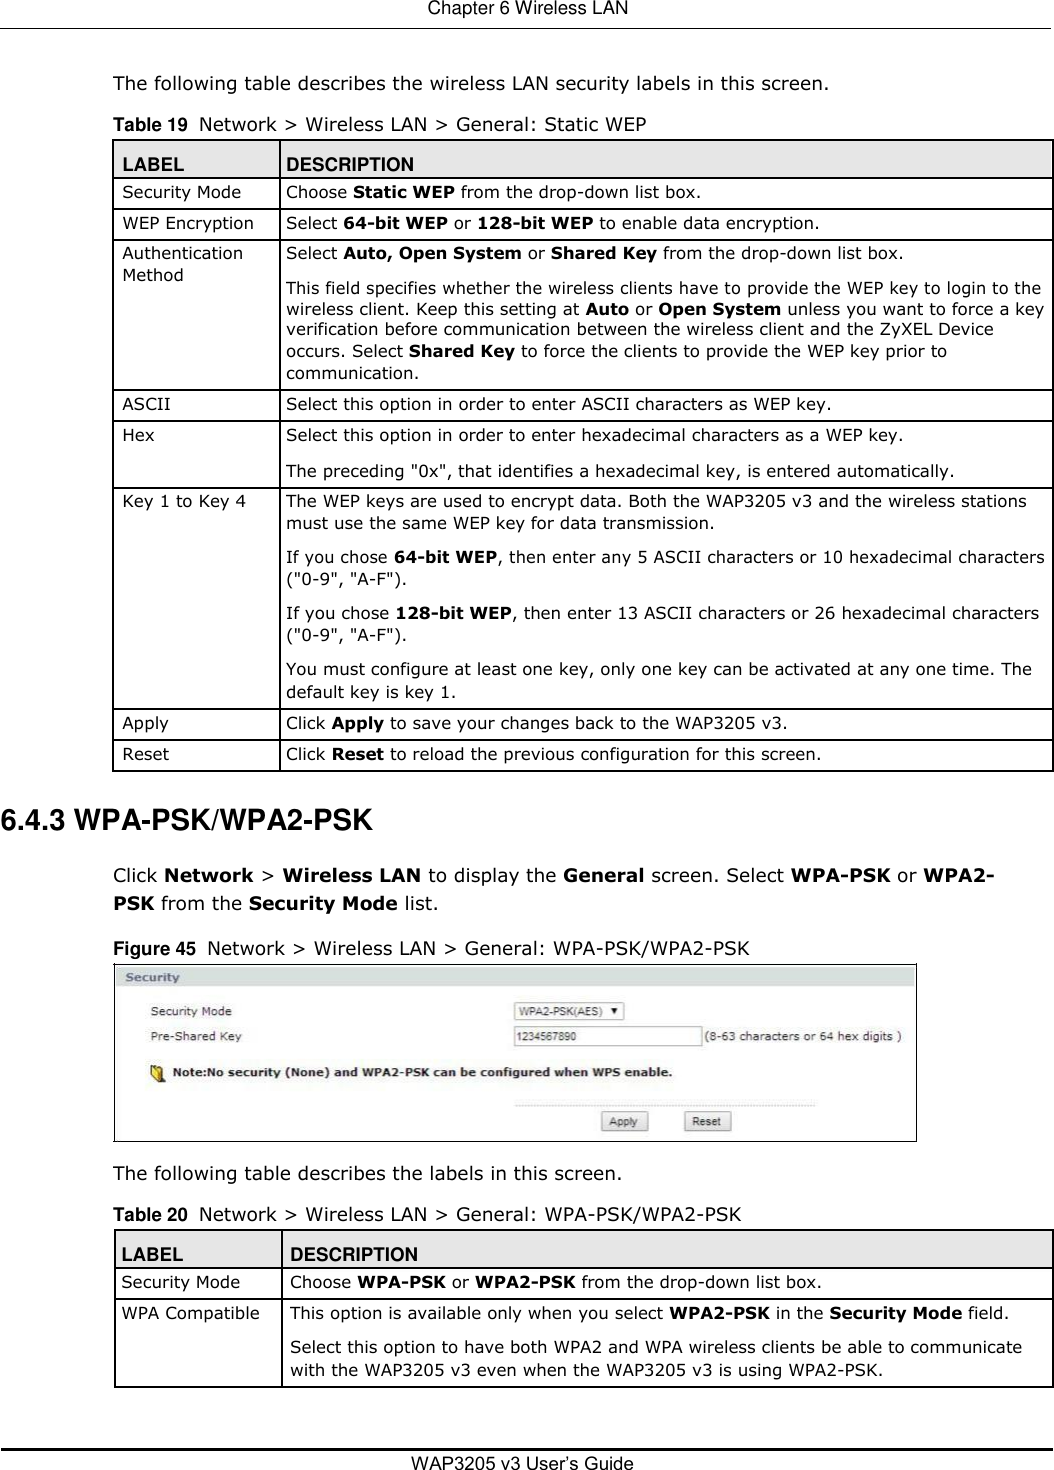  Chapter 6 Wireless LAN   The following table describes the wireless LAN security labels in this screen.  Table 19  Network &gt; Wireless LAN &gt; General: Static WEP  LABEL DESCRIPTION  Security Mode Choose Static WEP from the drop-down list box.     WEP Encryption Select 64-bit WEP or 128-bit WEP to enable data encryption.     Authentication Select Auto, Open System or Shared Key from the drop-down list box.  Method This field specifies whether the wireless clients have to provide the WEP key to login to the     wireless client. Keep this setting at Auto or Open System unless you want to force a key   verification before communication between the wireless client and the ZyXEL Device   occurs. Select Shared Key to force the clients to provide the WEP key prior to   communication.     ASCII Select this option in order to enter ASCII characters as WEP key.     Hex Select this option in order to enter hexadecimal characters as a WEP key.   The preceding &quot;0x&quot;, that identifies a hexadecimal key, is entered automatically.     Key 1 to Key 4 The WEP keys are used to encrypt data. Both the WAP3205 v3 and the wireless stations   must use the same WEP key for data transmission.   If you chose 64-bit WEP, then enter any 5 ASCII characters or 10 hexadecimal characters   (&quot;0-9&quot;, &quot;A-F&quot;).   If you chose 128-bit WEP, then enter 13 ASCII characters or 26 hexadecimal characters   (&quot;0-9&quot;, &quot;A-F&quot;).   You must configure at least one key, only one key can be activated at any one time. The   default key is key 1.     Apply Click Apply to save your changes back to the WAP3205 v3.     Reset Click Reset to reload the previous configuration for this screen.      6.4.3 WPA-PSK/WPA2-PSK  Click Network &gt; Wireless LAN to display the General screen. Select WPA-PSK or WPA2-PSK from the Security Mode list.  Figure 45  Network &gt; Wireless LAN &gt; General: WPA-PSK/WPA2-PSK          The following table describes the labels in this screen.  Table 20  Network &gt; Wireless LAN &gt; General: WPA-PSK/WPA2-PSK   LABEL DESCRIPTION  Security Mode Choose WPA-PSK or WPA2-PSK from the drop-down list box.     WPA Compatible This option is available only when you select WPA2-PSK in the Security Mode field.   Select this option to have both WPA2 and WPA wireless clients be able to communicate   with the WAP3205 v3 even when the WAP3205 v3 is using WPA2-PSK.         WAP3205 v3 User’s Guide 